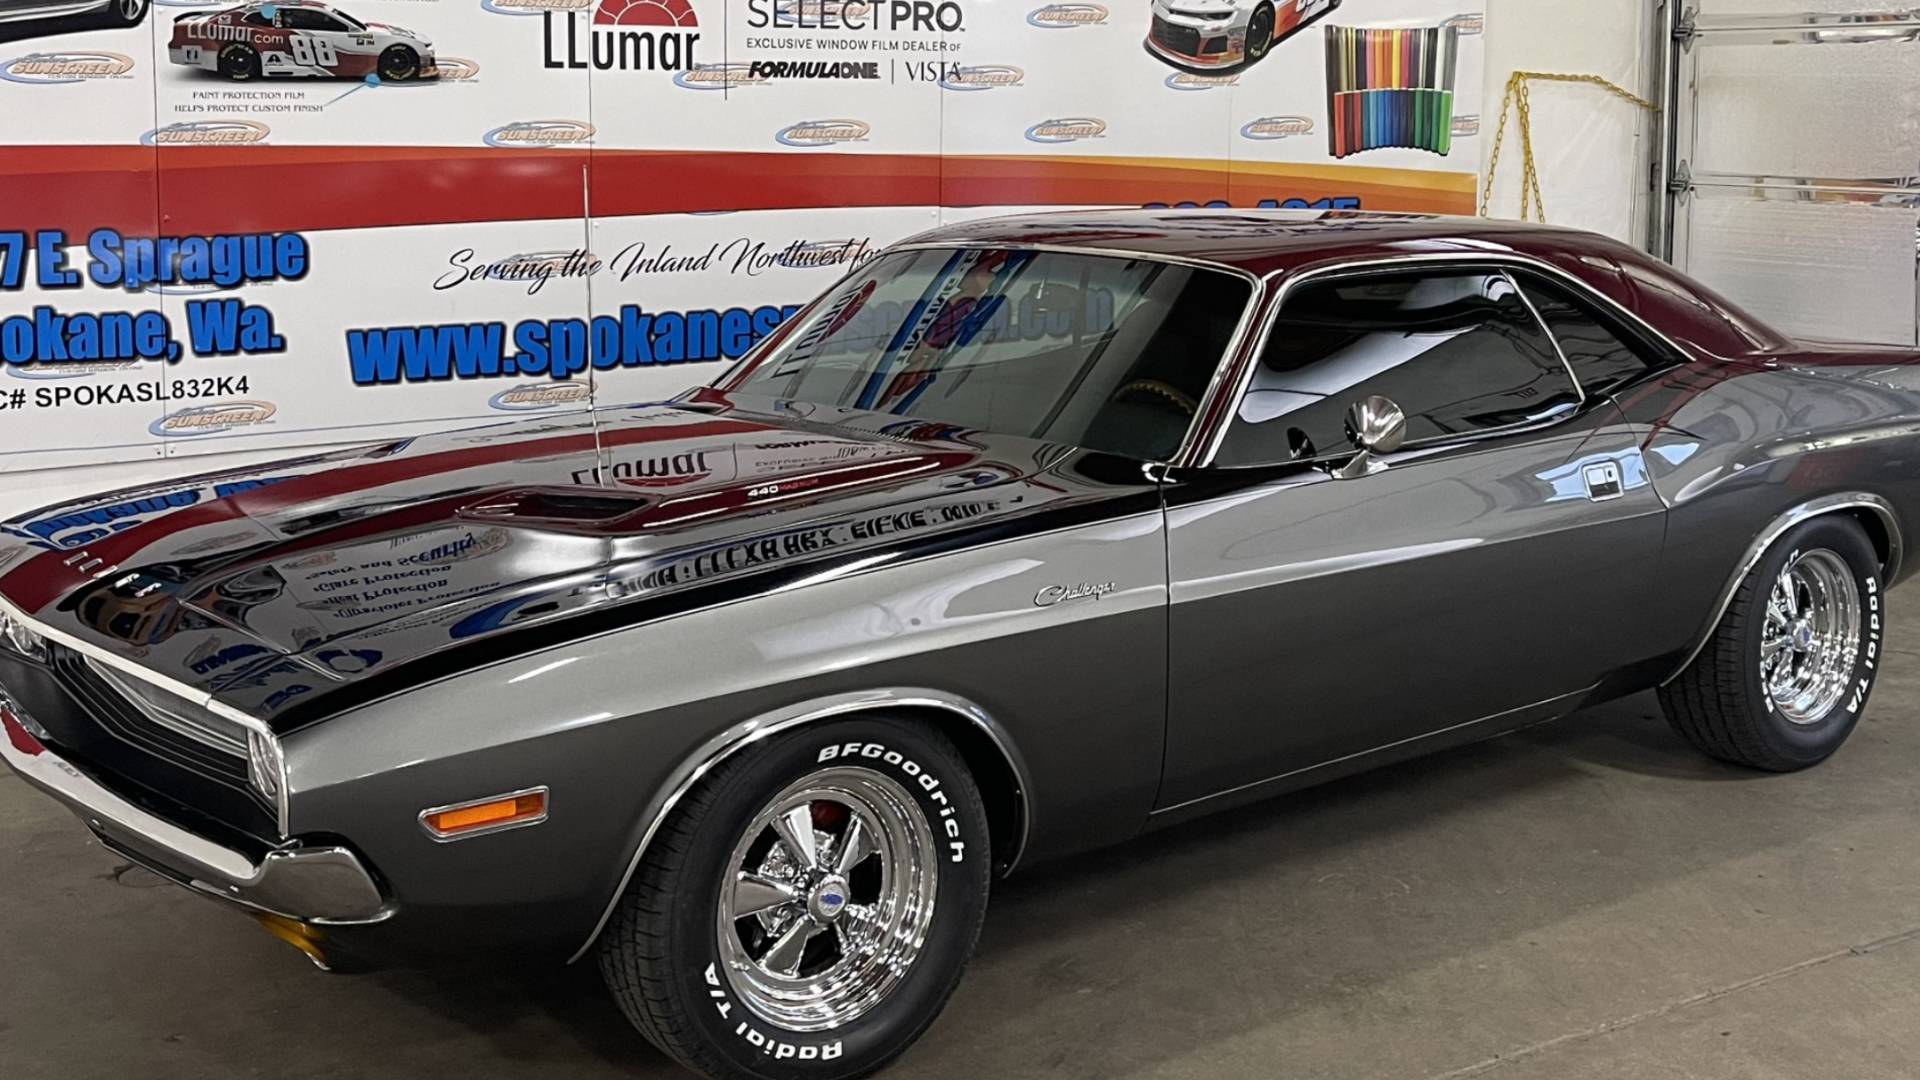 Classic silver Dodge Challenger with black stripes on display inside a showroom, featuring chrome wheels and the Challenger emblem on the side.